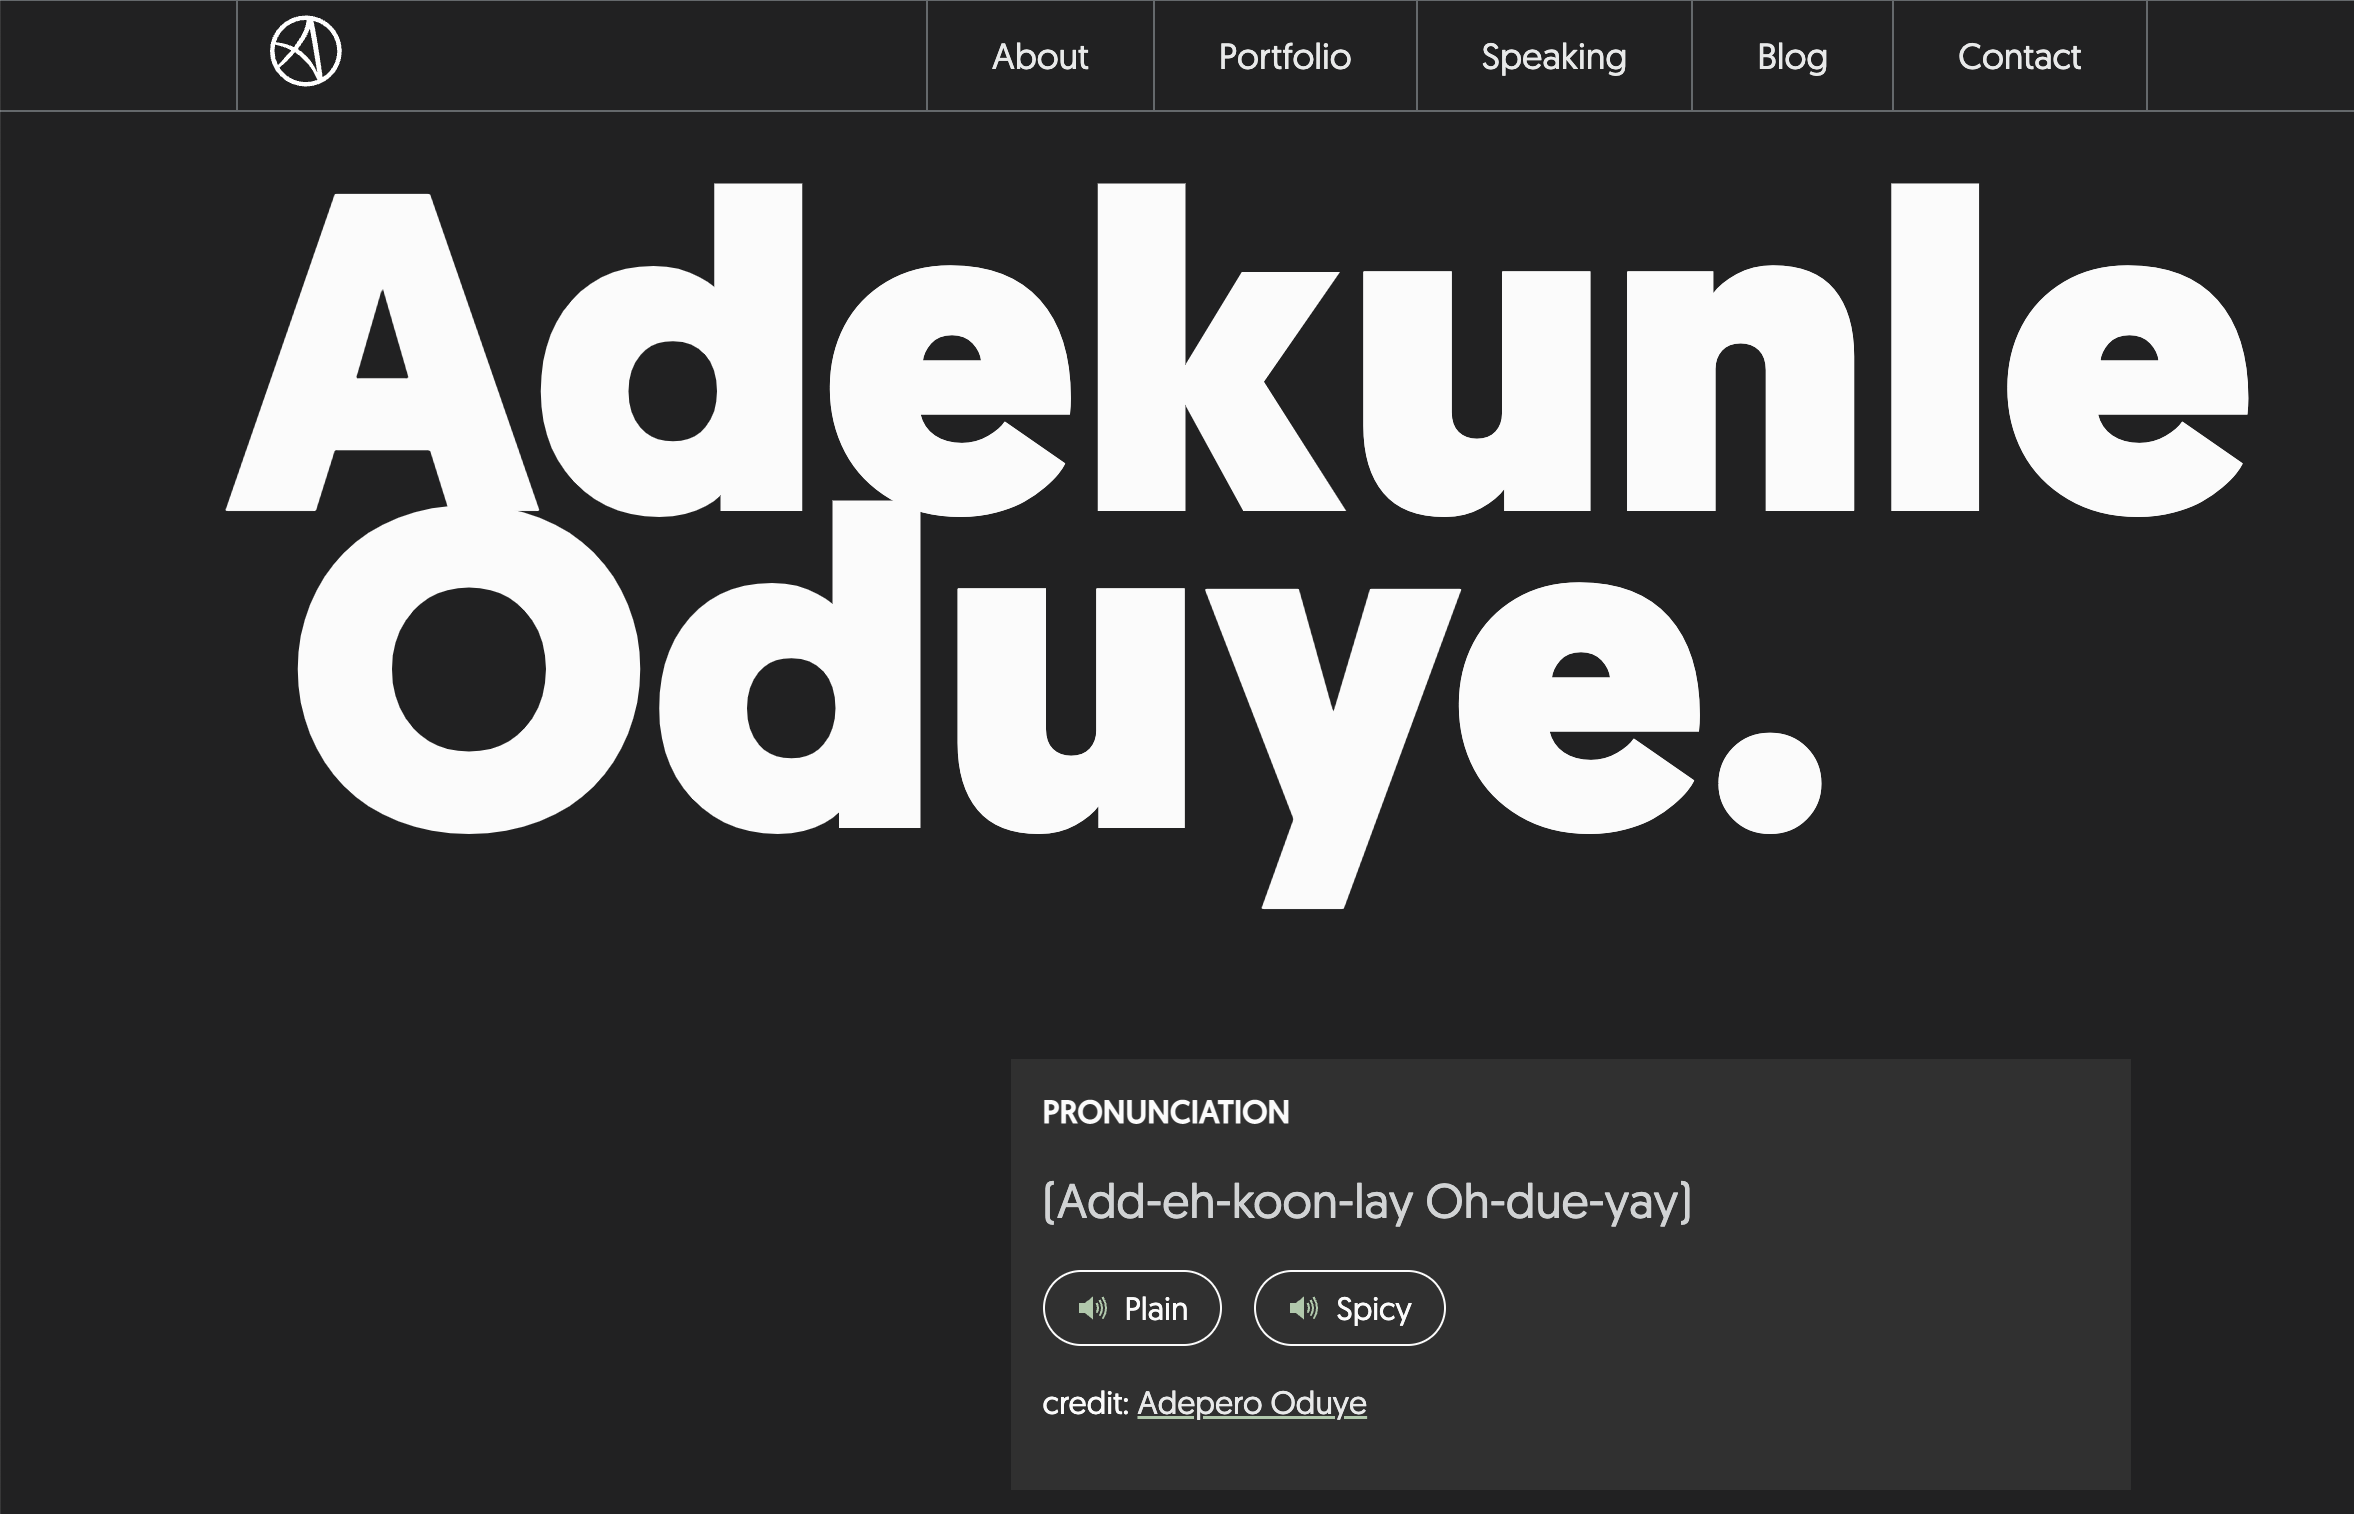 Huge white sans-serif type spells out, 'Adenkunle Oduye.' The name sticks starkly out from a black background and a mininal design. Below the name is a small pronounciation guide that reads, 'Add-eh-koon-lay Oh-due-yay.' There are two buttons present after the pronounciation, one offering a plain audio pronounciation and one offering a spicy audio pronounciation. Screenshot.